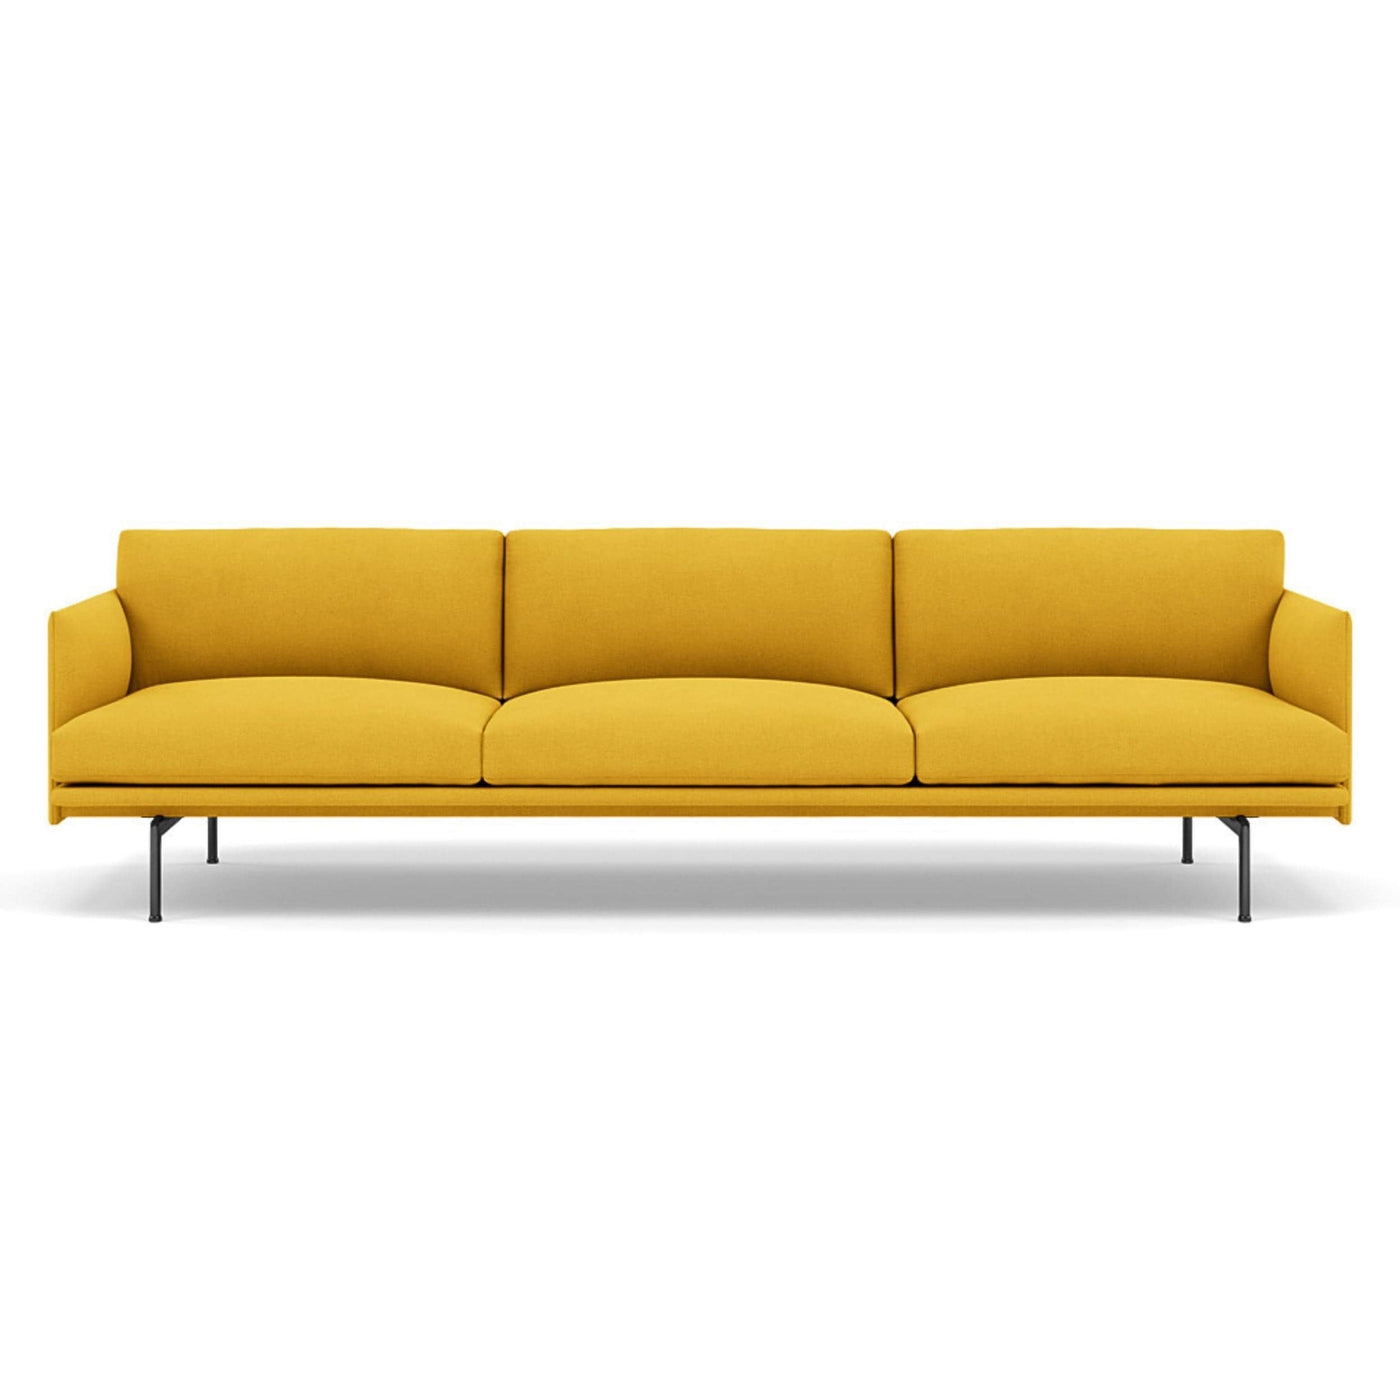 muuto outline 3.5 seater sofa in hallingdal 457 yellow and black legs. Made to order from someday designs. #colour_hallingdal-457